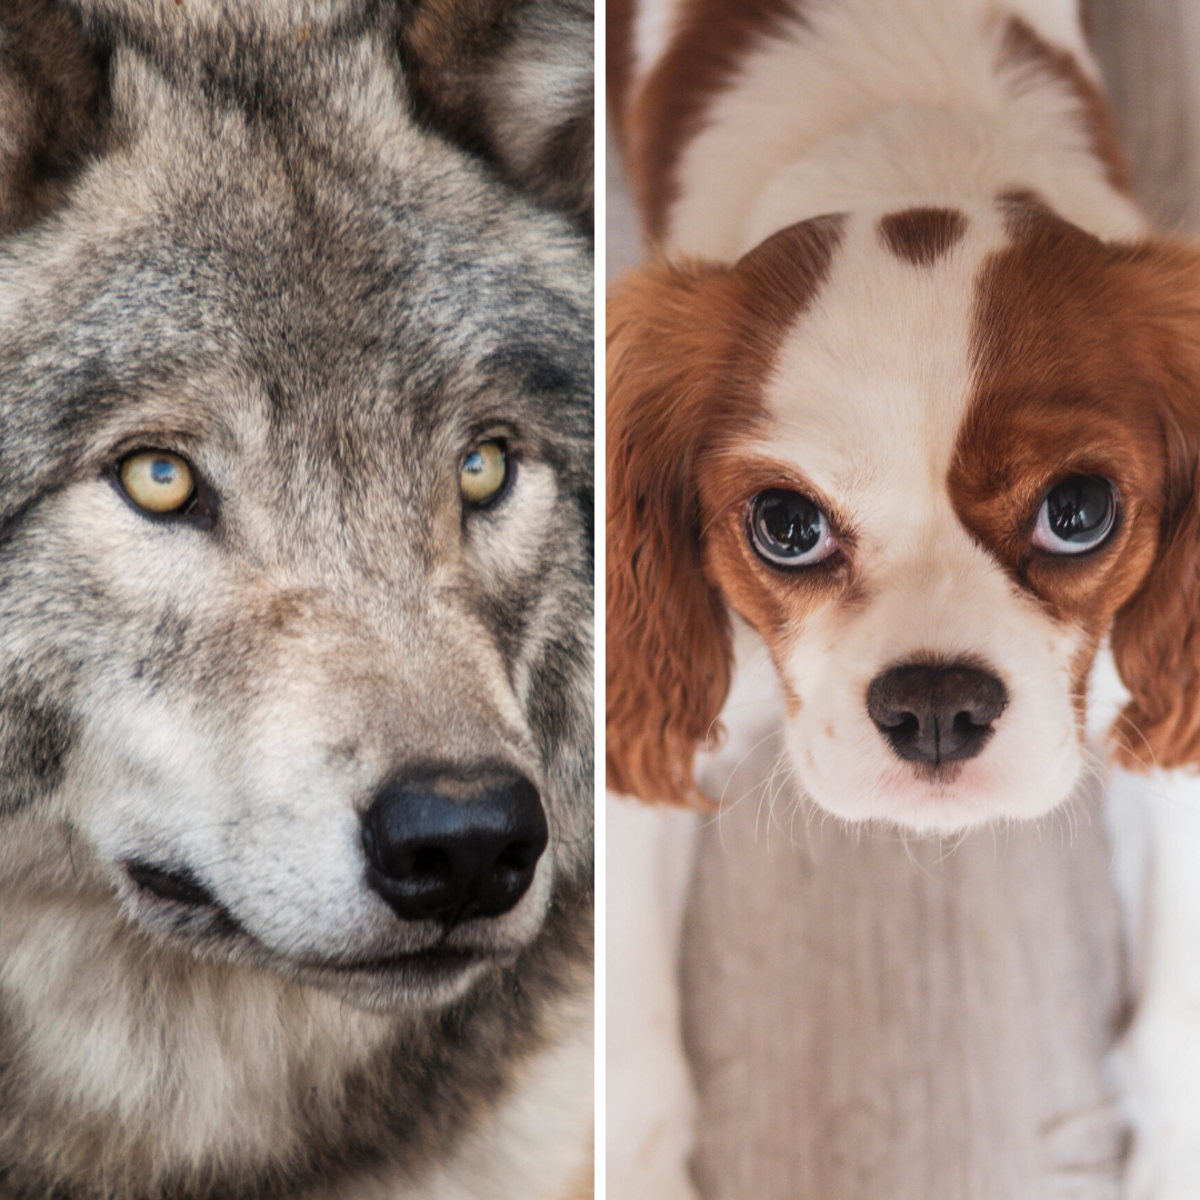 Wild vs. Domesticated Animals: Why Domestication Has Nothing to Do With